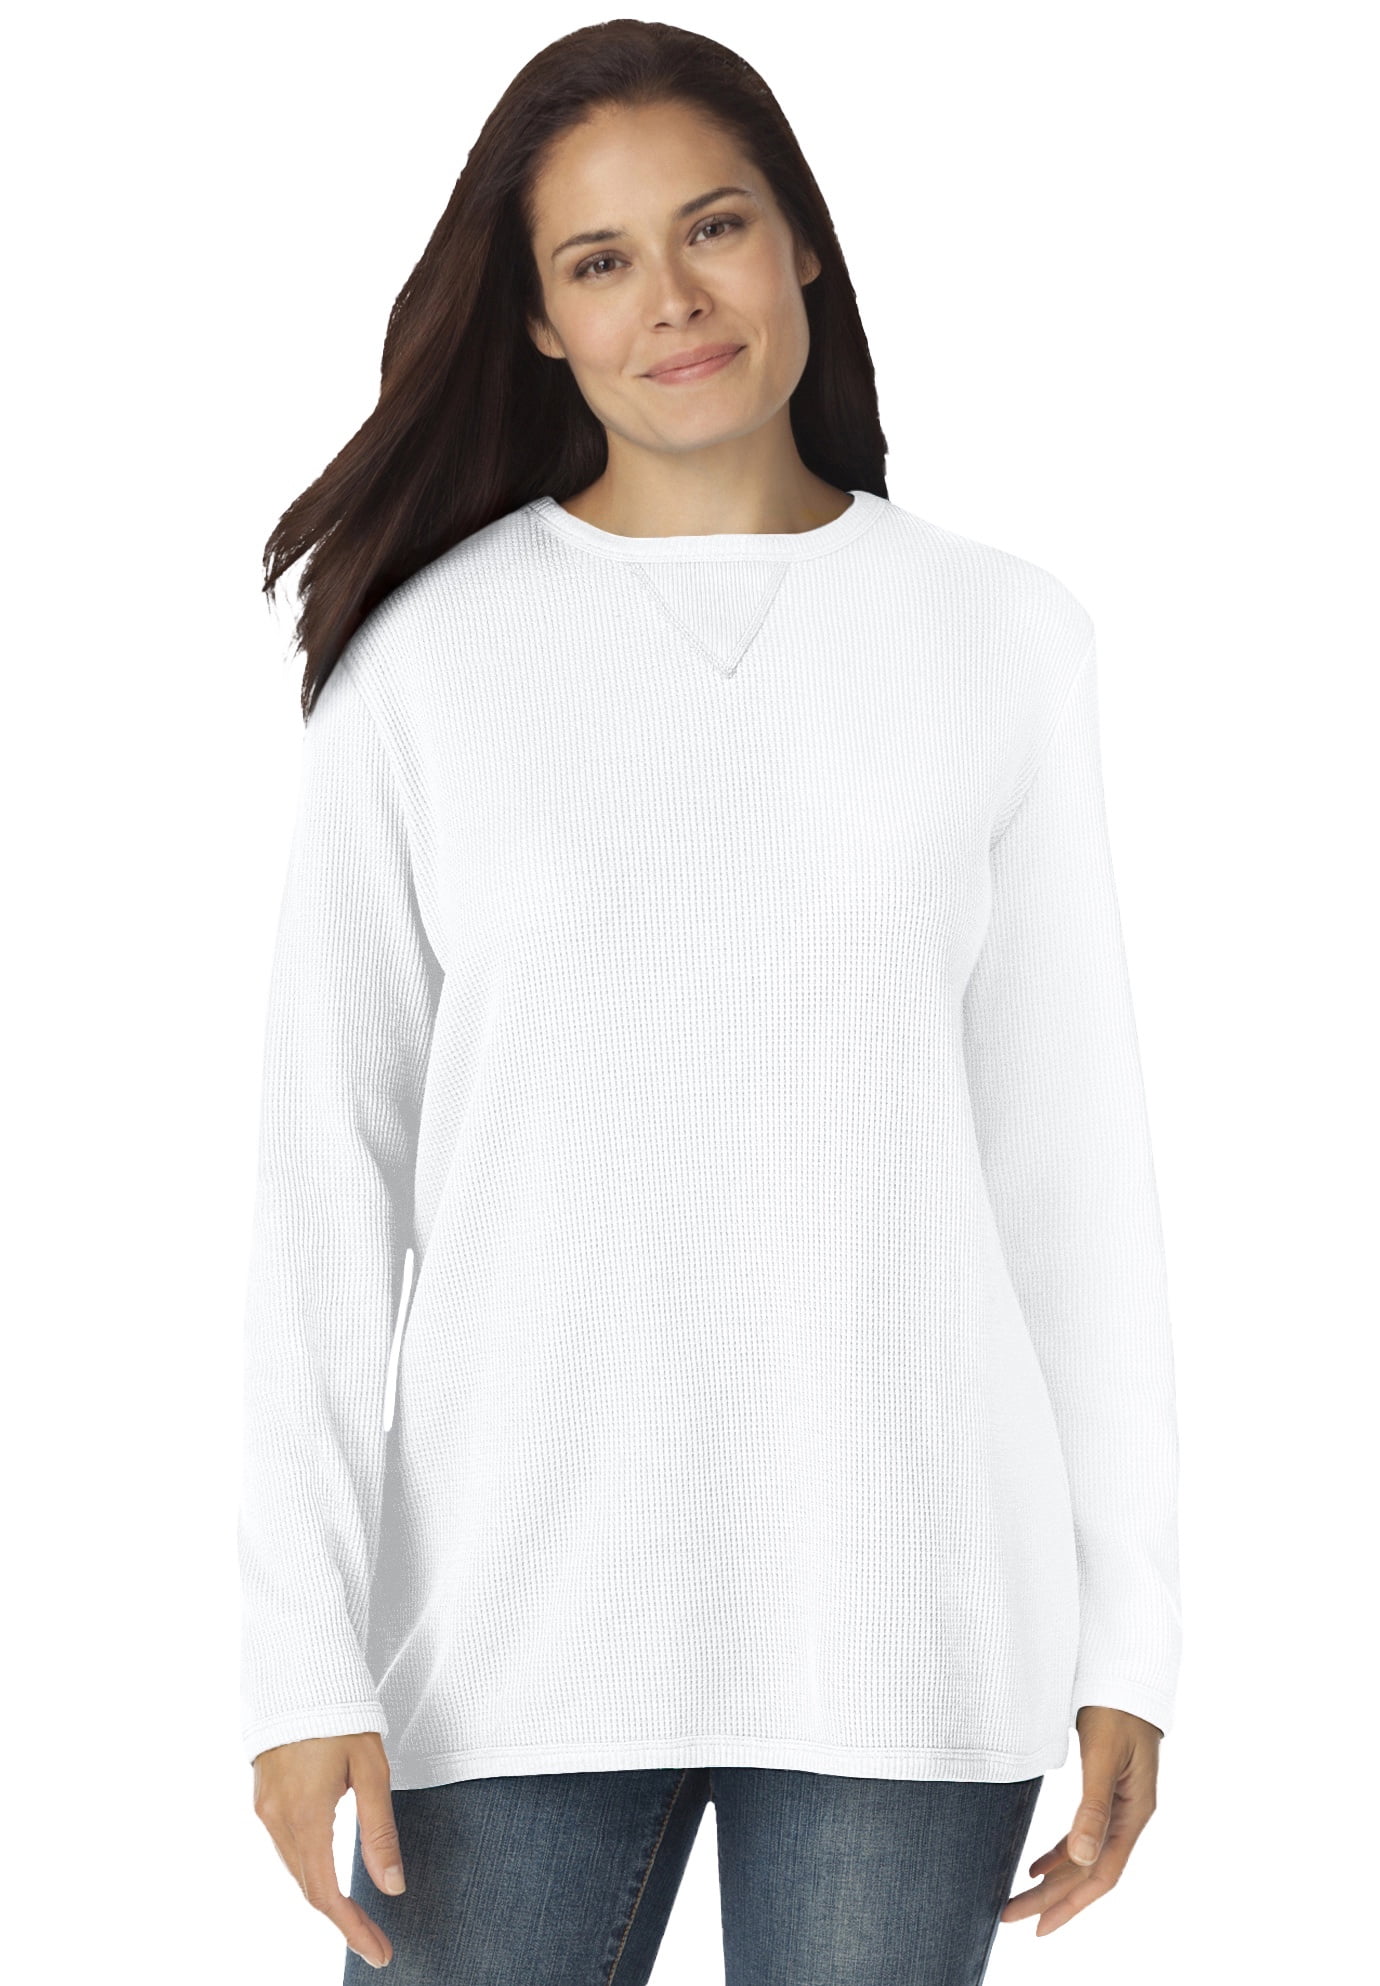 Plus Size Women's Thermal Sweatshirt by Woman Within in White